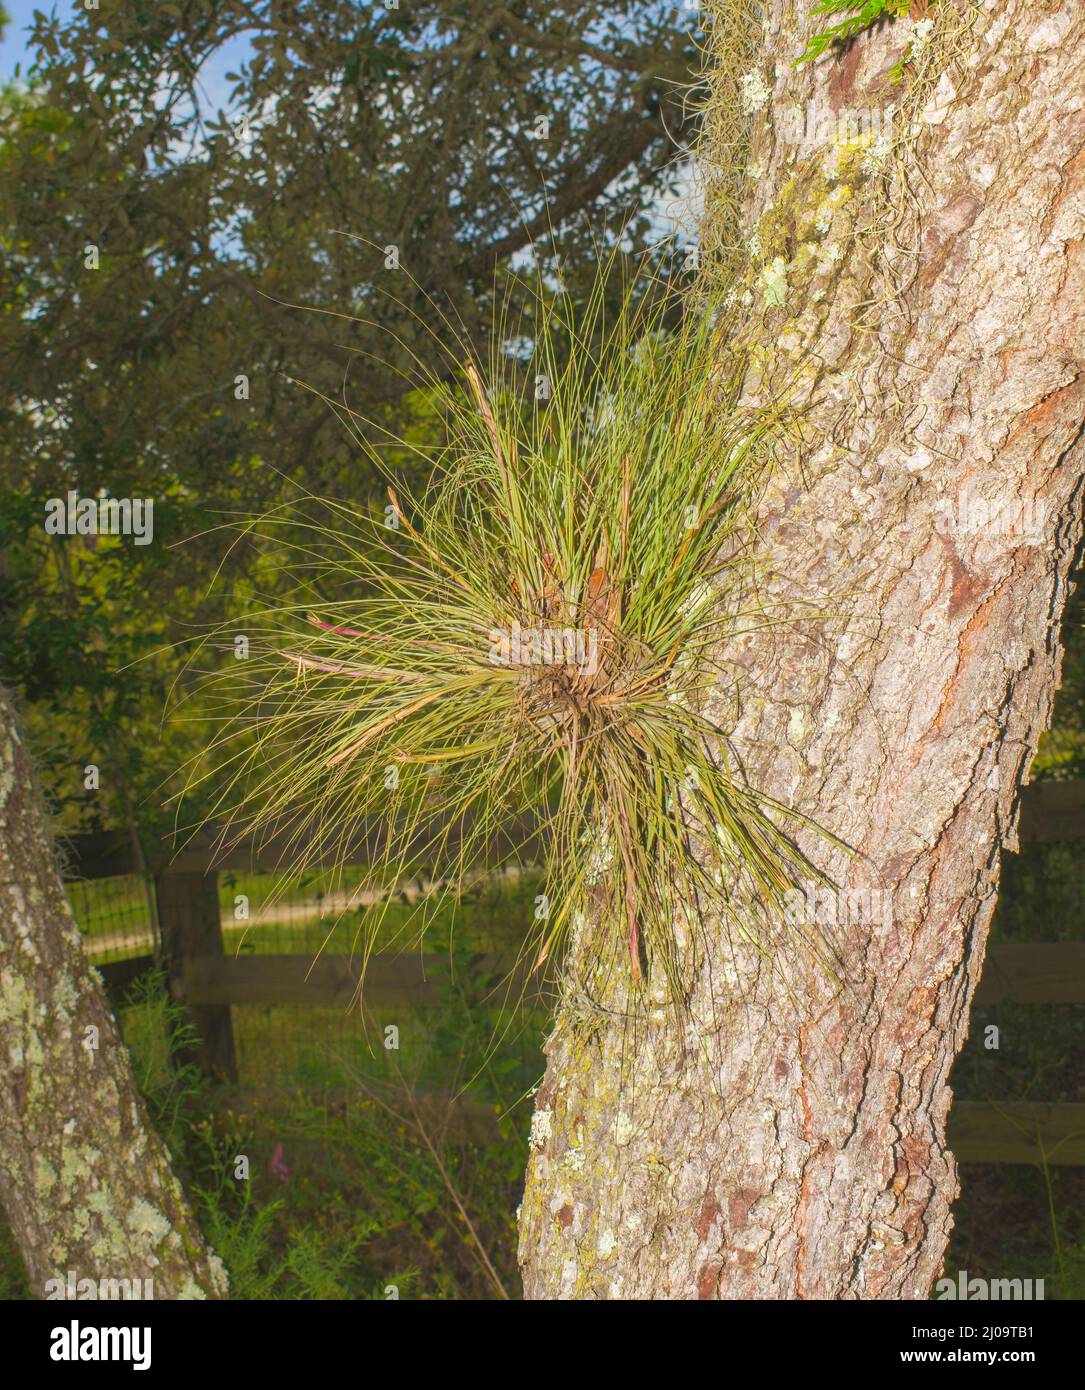 Giant size Bartram’s air plant - Tillandsia bartramii growing on the side of a sand live oak tree Stock Photo